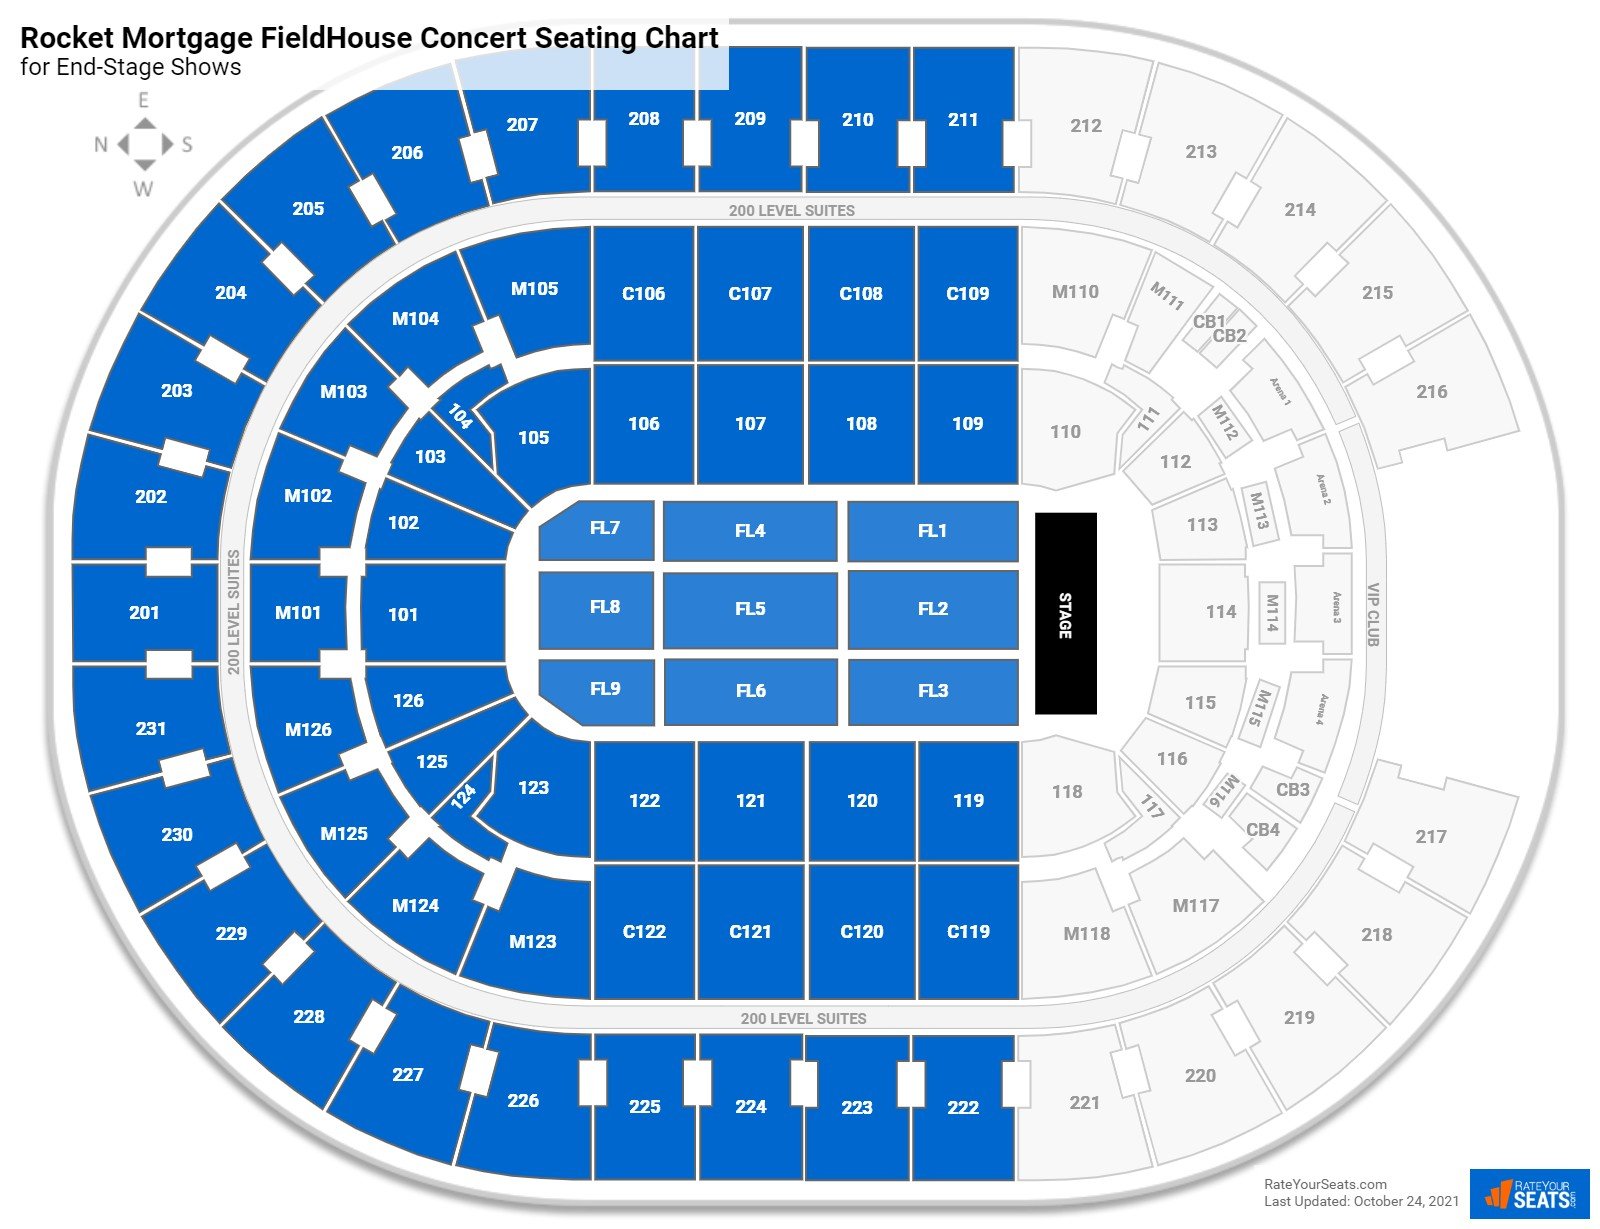 Rocket Mortgage FieldHouse Concert Seating Chart